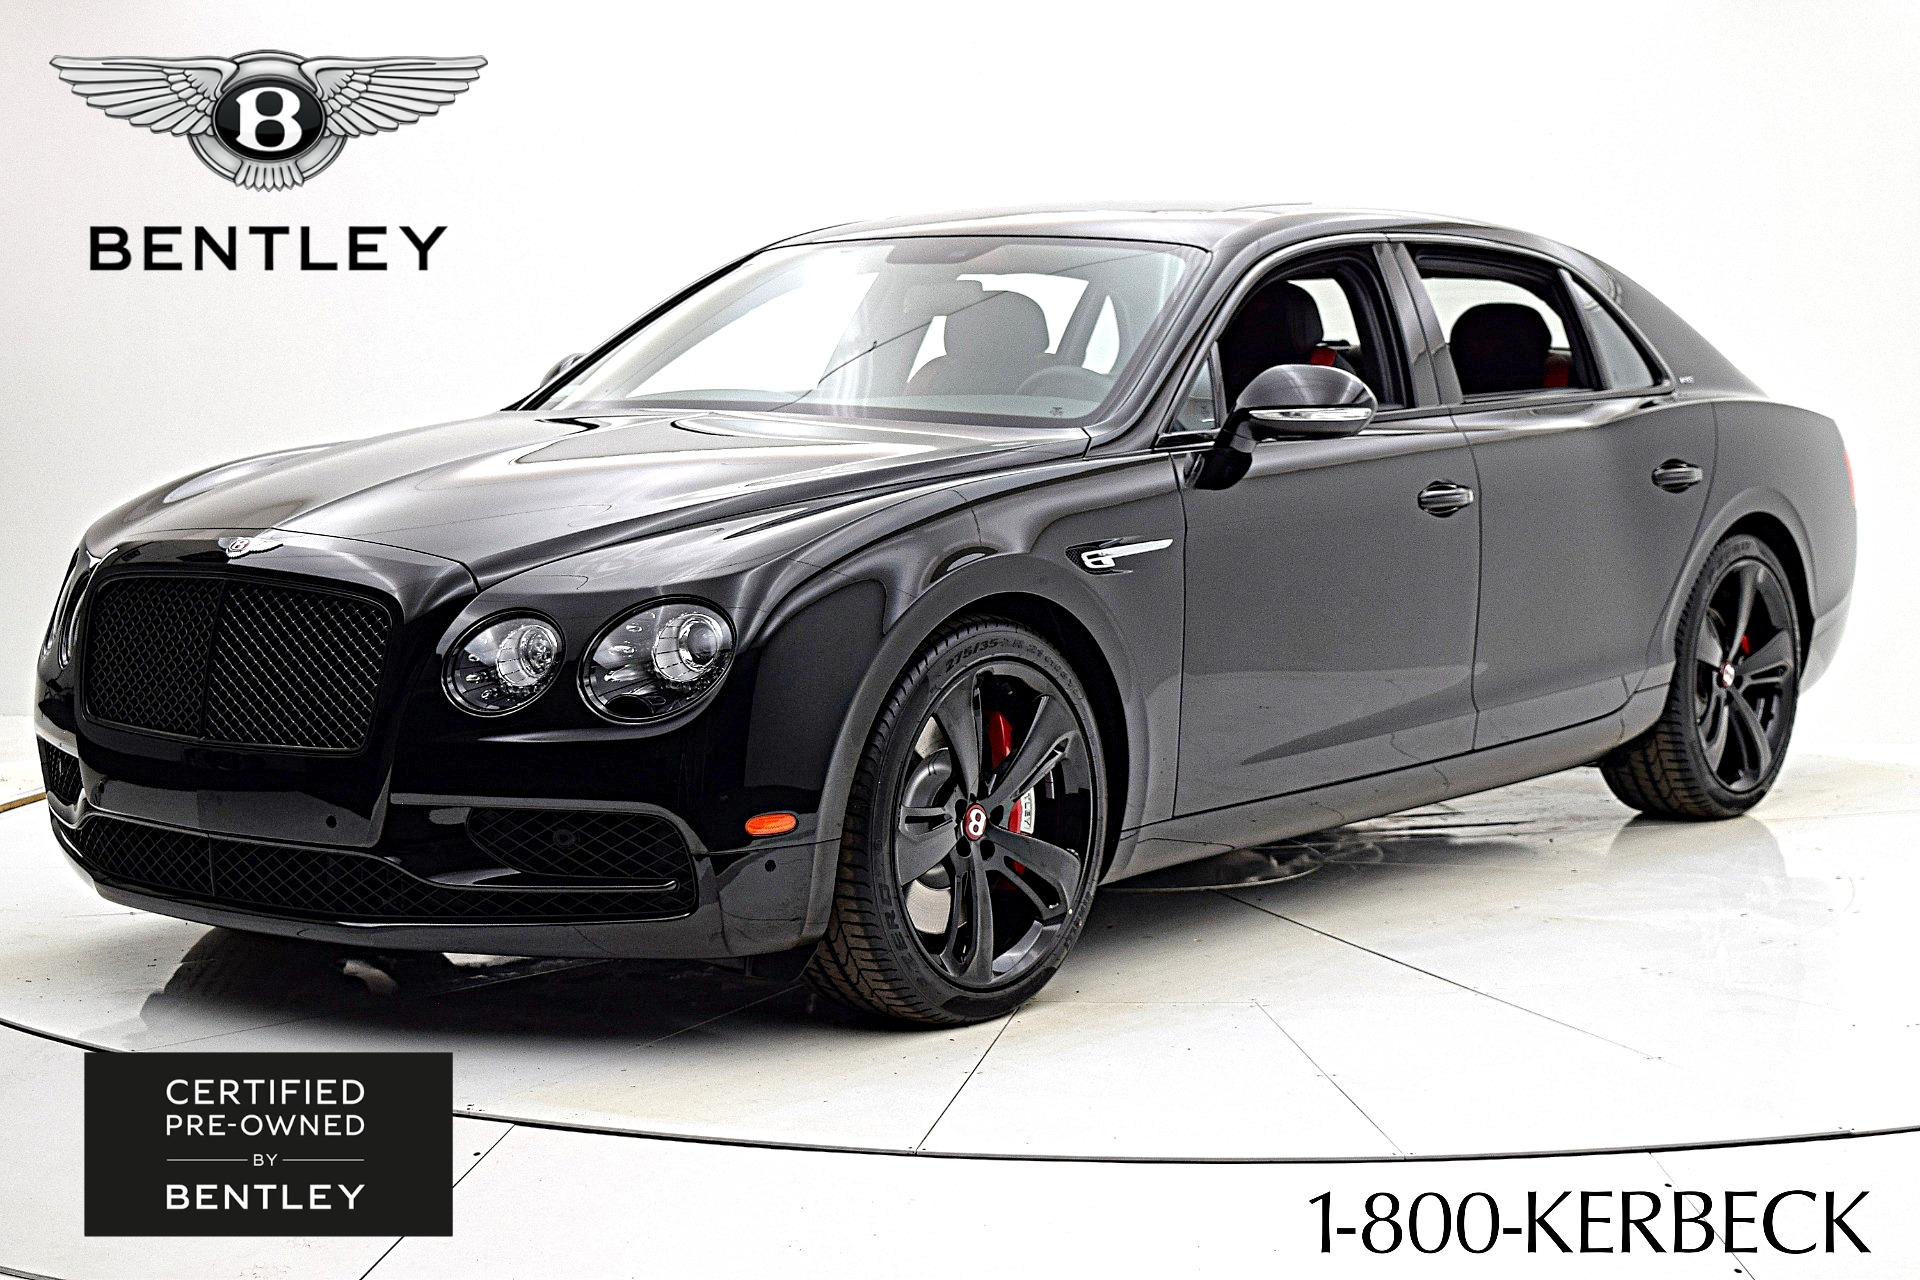 Used 2018 Bentley Flying Spur V8 S for sale Sold at Bentley Palmyra N.J. in Palmyra NJ 08065 2